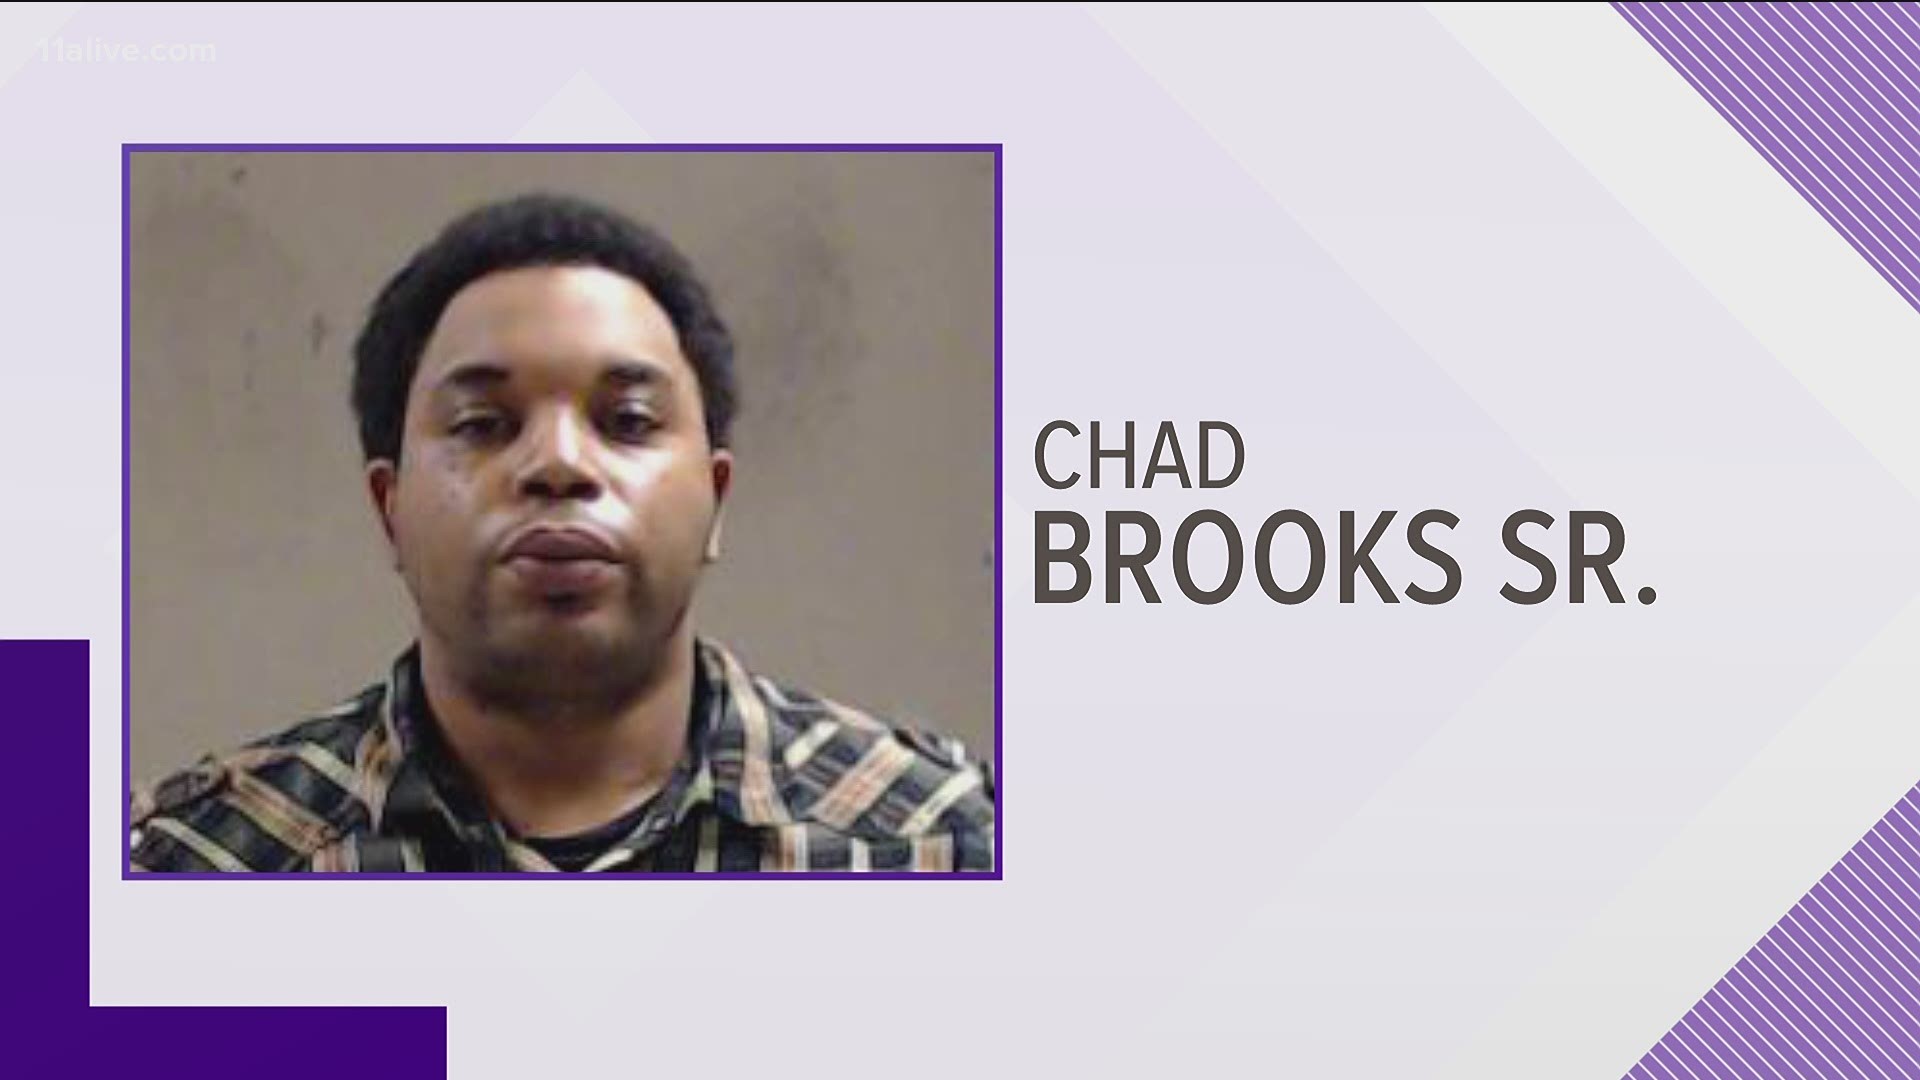 Police are still trying to determine who shot the child but believe the gun belonged to 36-year-old Chad Brooks Sr.